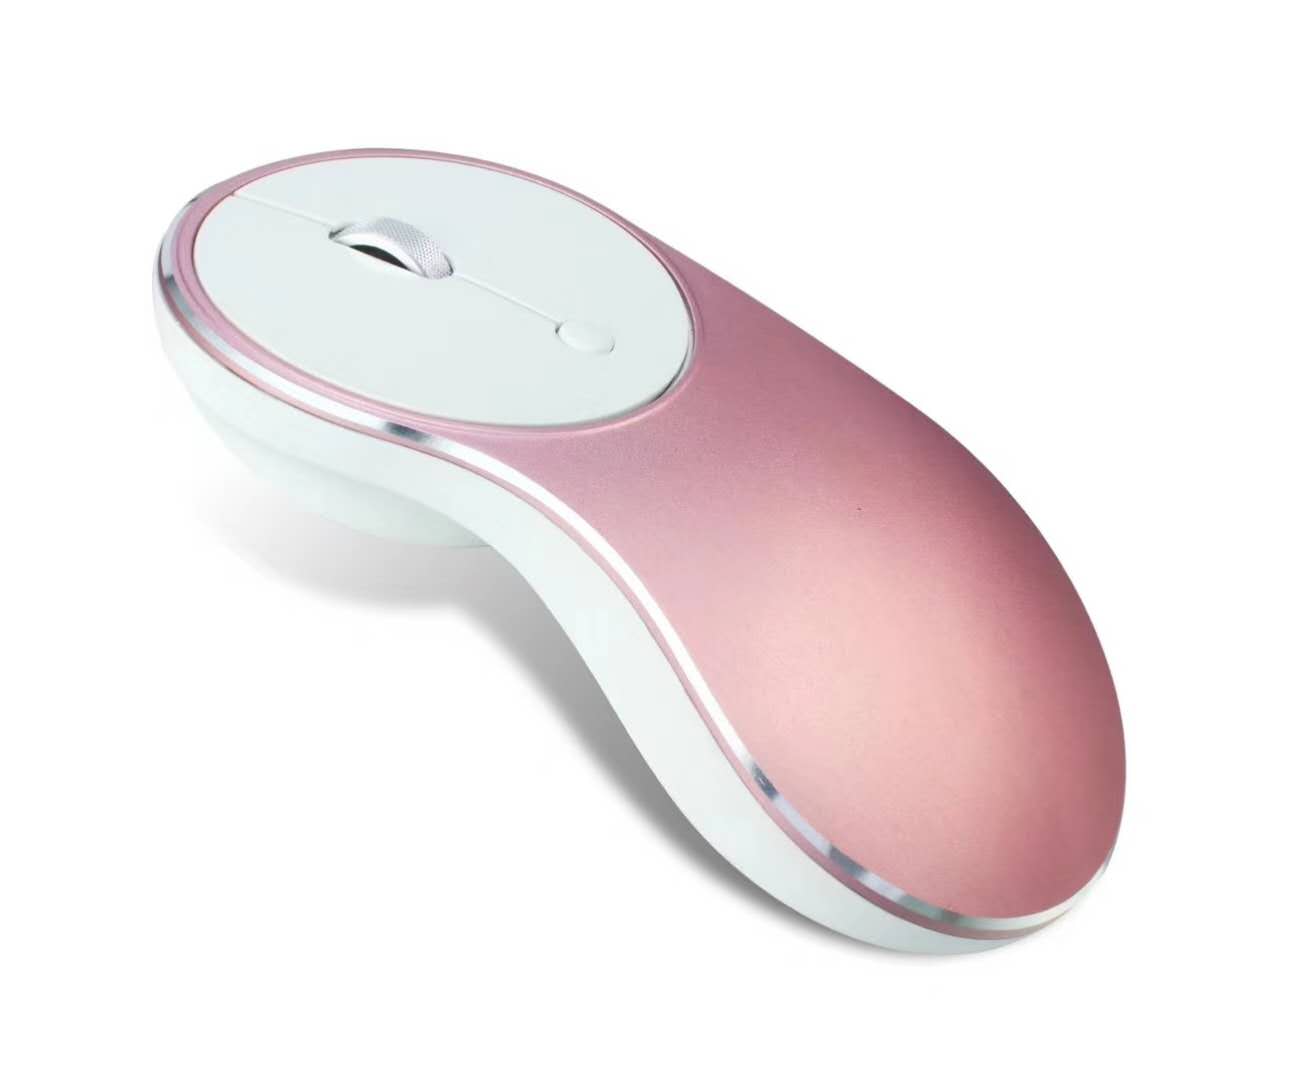 Rechargeable 2.4G Wireless Mouse,Aluminum Material Frame,Various Color Optional